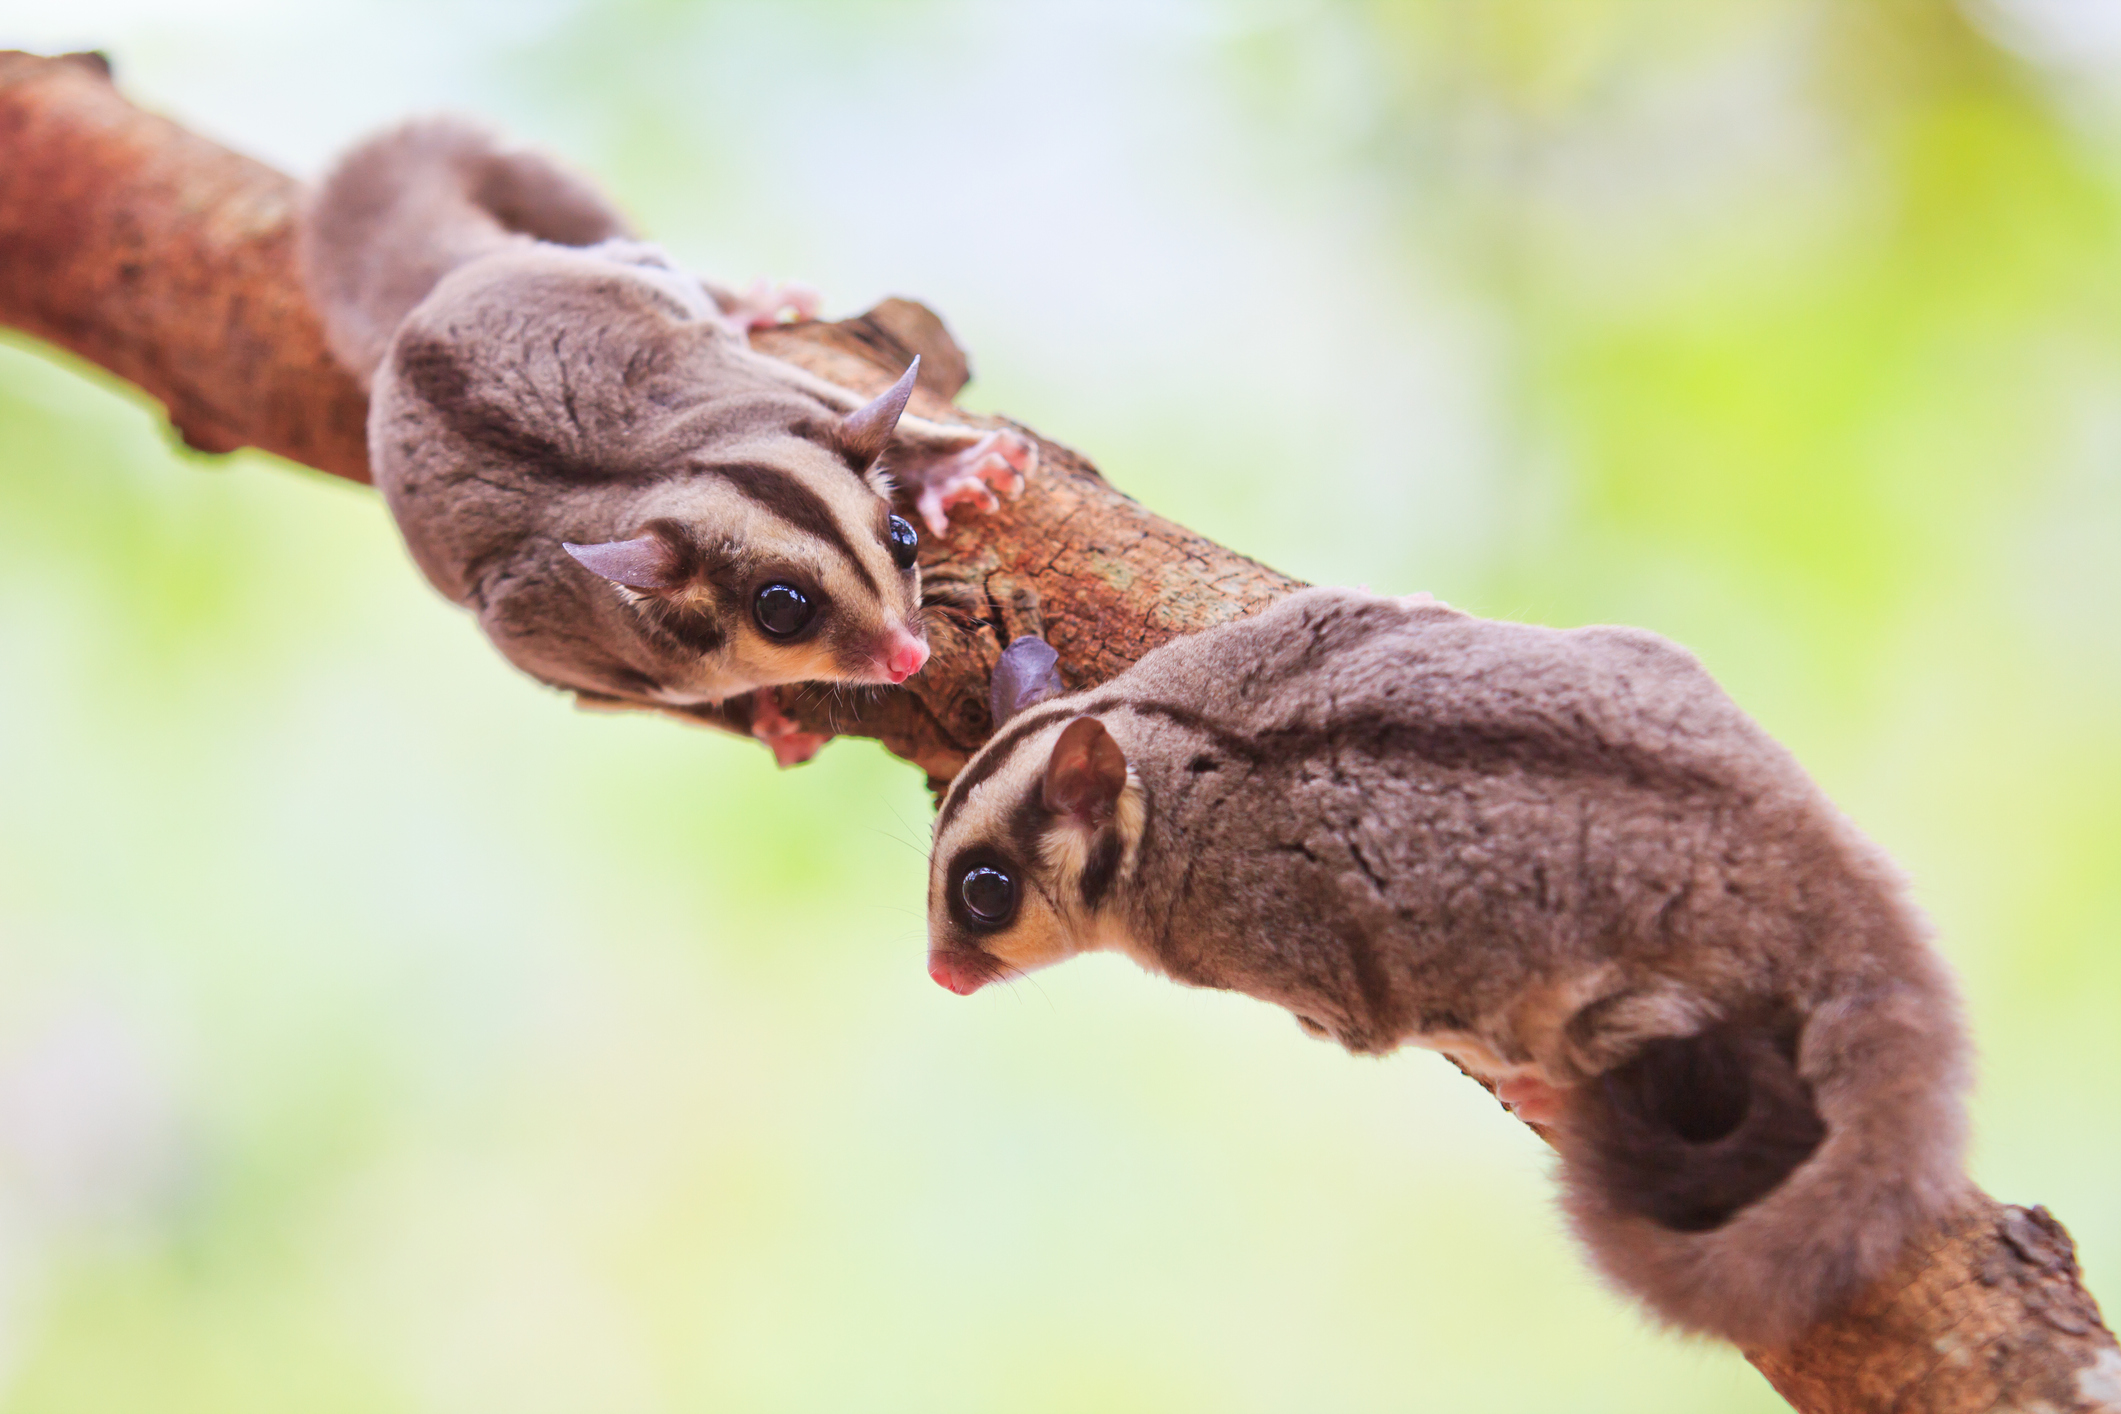 Two sugar gliders on a branch facing each other